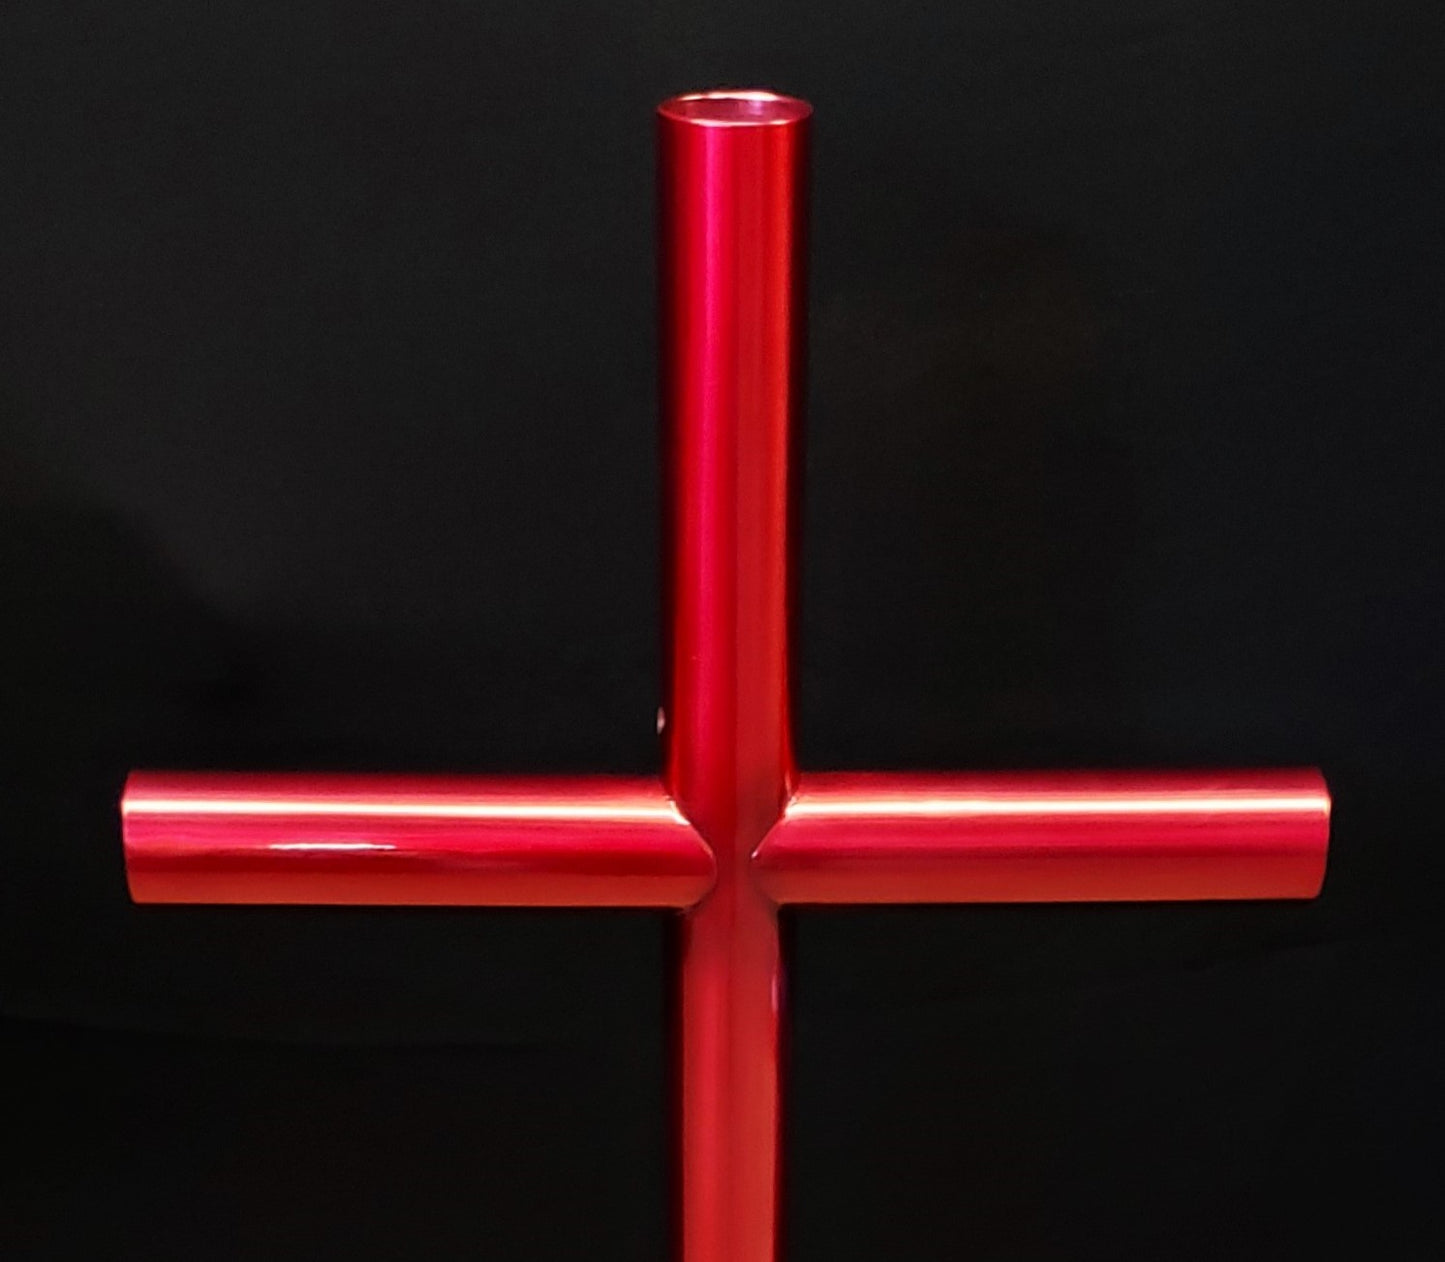 Memorial Berry Pink Everlasting Cross is A Timeless For Cremation Urn in Canada, USA or Worldwide. Cremation Urn for Garden Memorial grave, Container to Store Special Momentos, Remembering Falling Soldier, Officer or Our Family Pet. This Everlasting Cross Will Remembr Forever